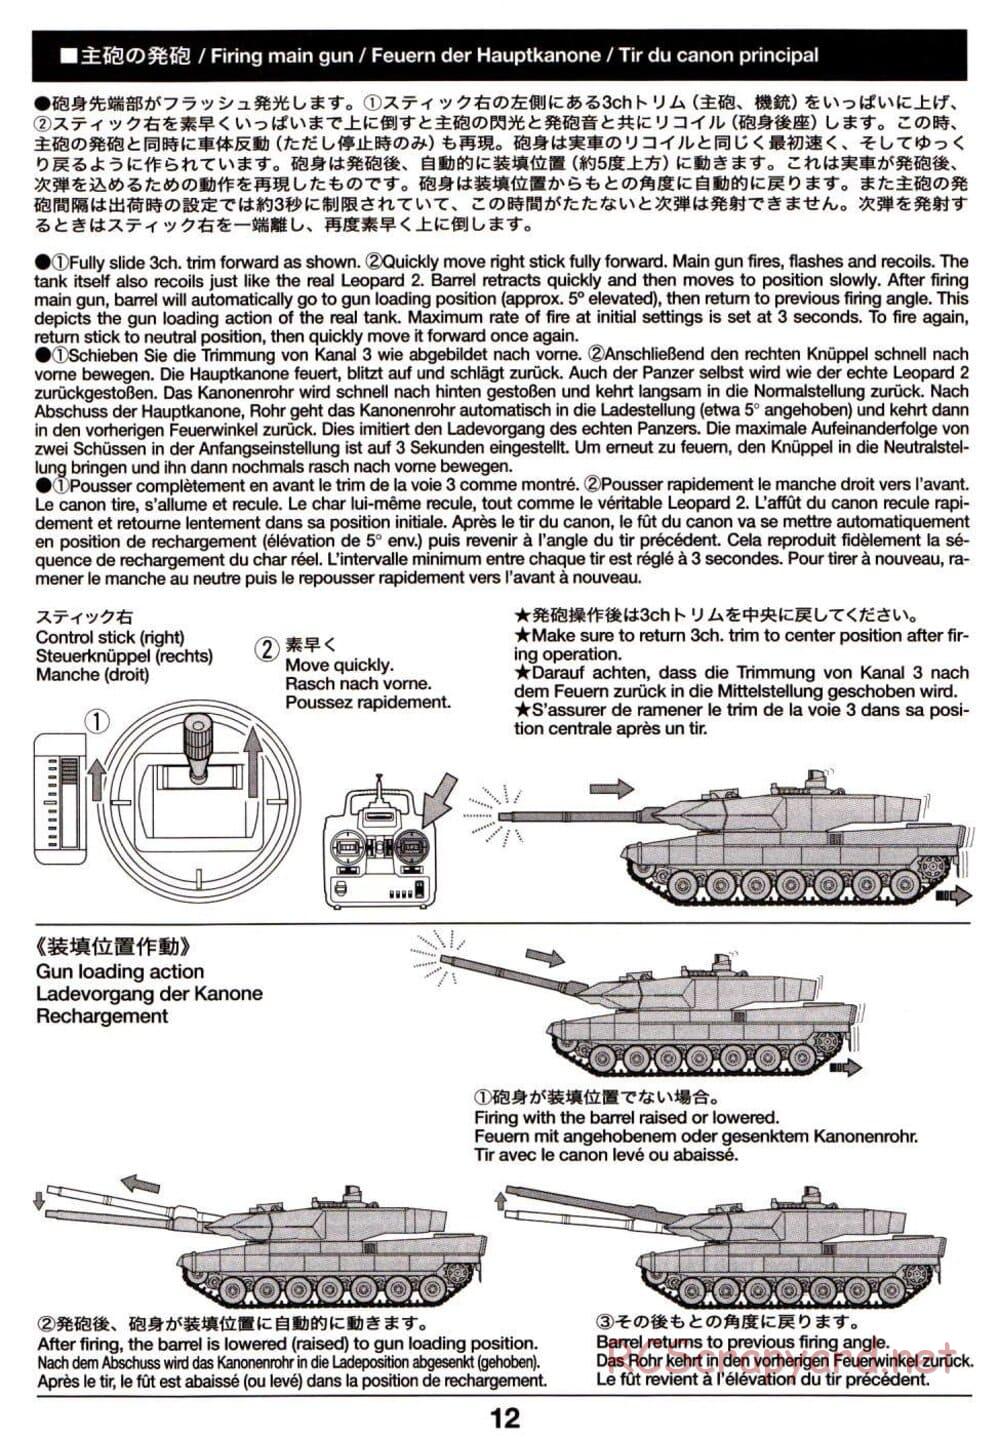 Tamiya - Leopard 2 A6 - 1/16 Scale Chassis - Operation Manual - Page 12